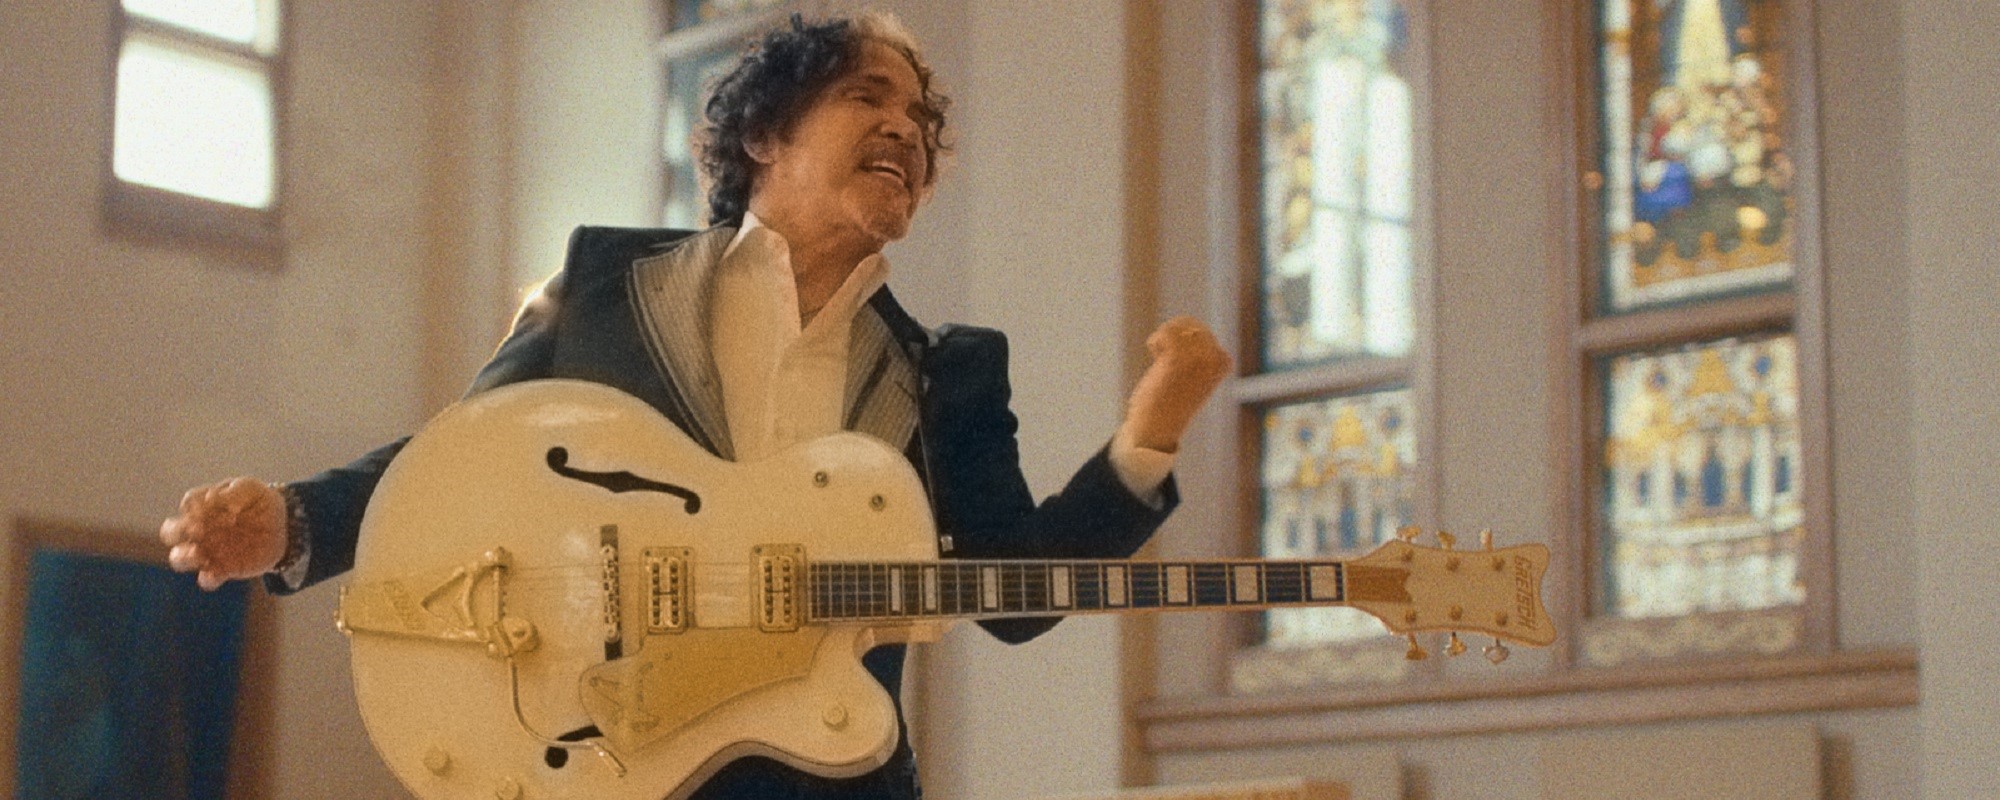 Exclusive: Ex-Hall & Oates Singer John Oates Discusses His New Cover of John Prine’s Evocative Song “Long Monday”